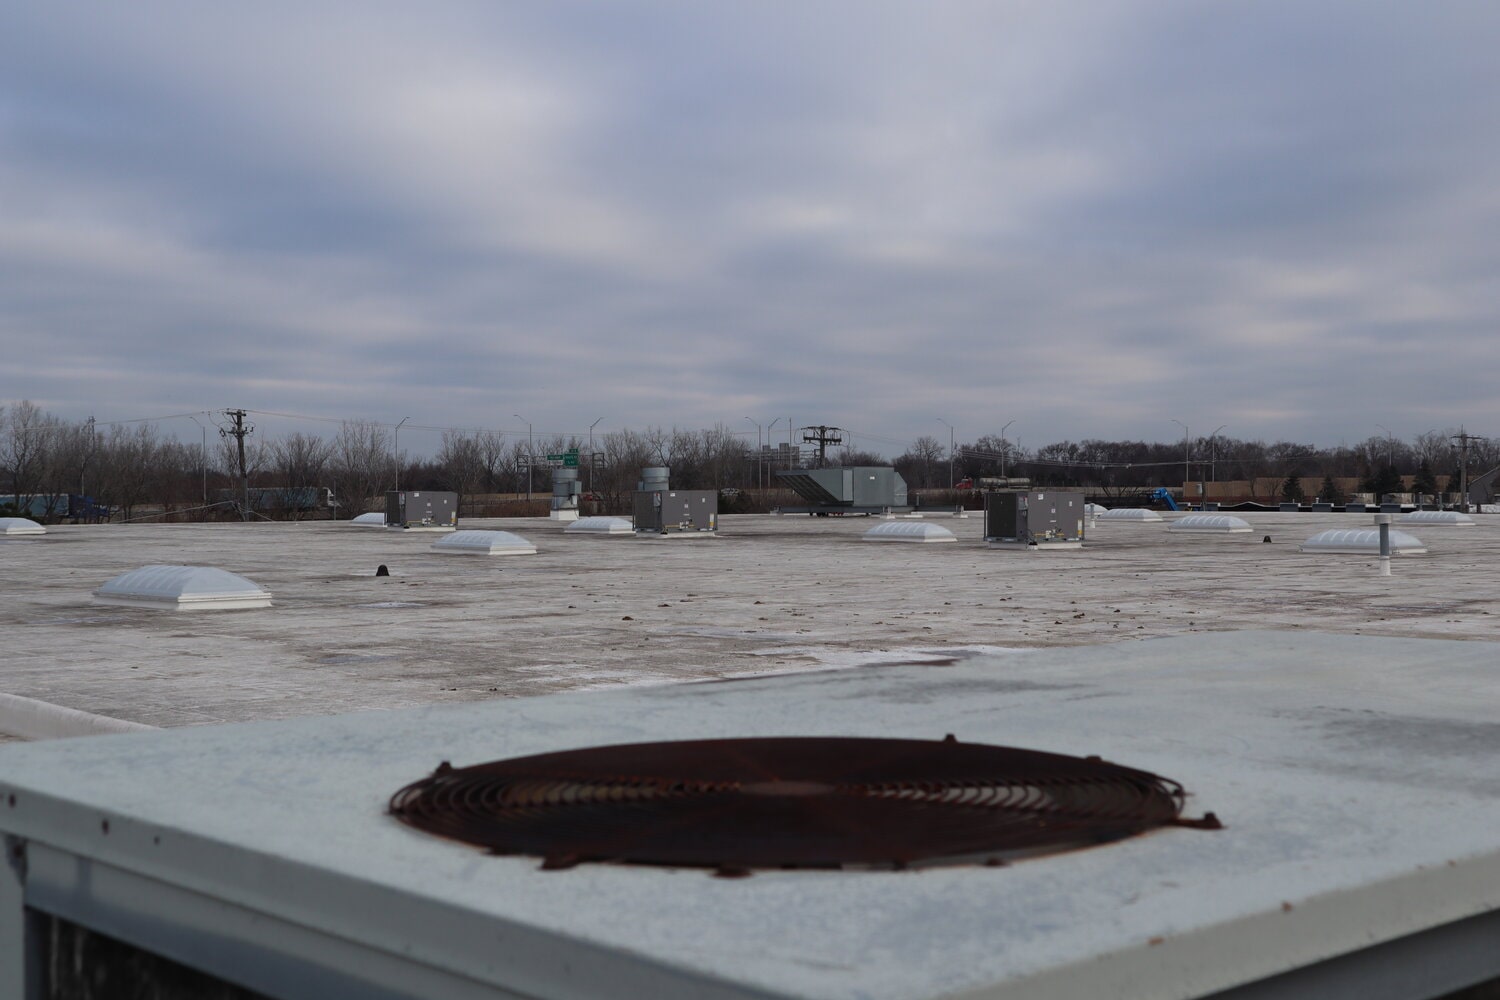 The roof of our large industrial spray painting booth at Schaumburg HQ